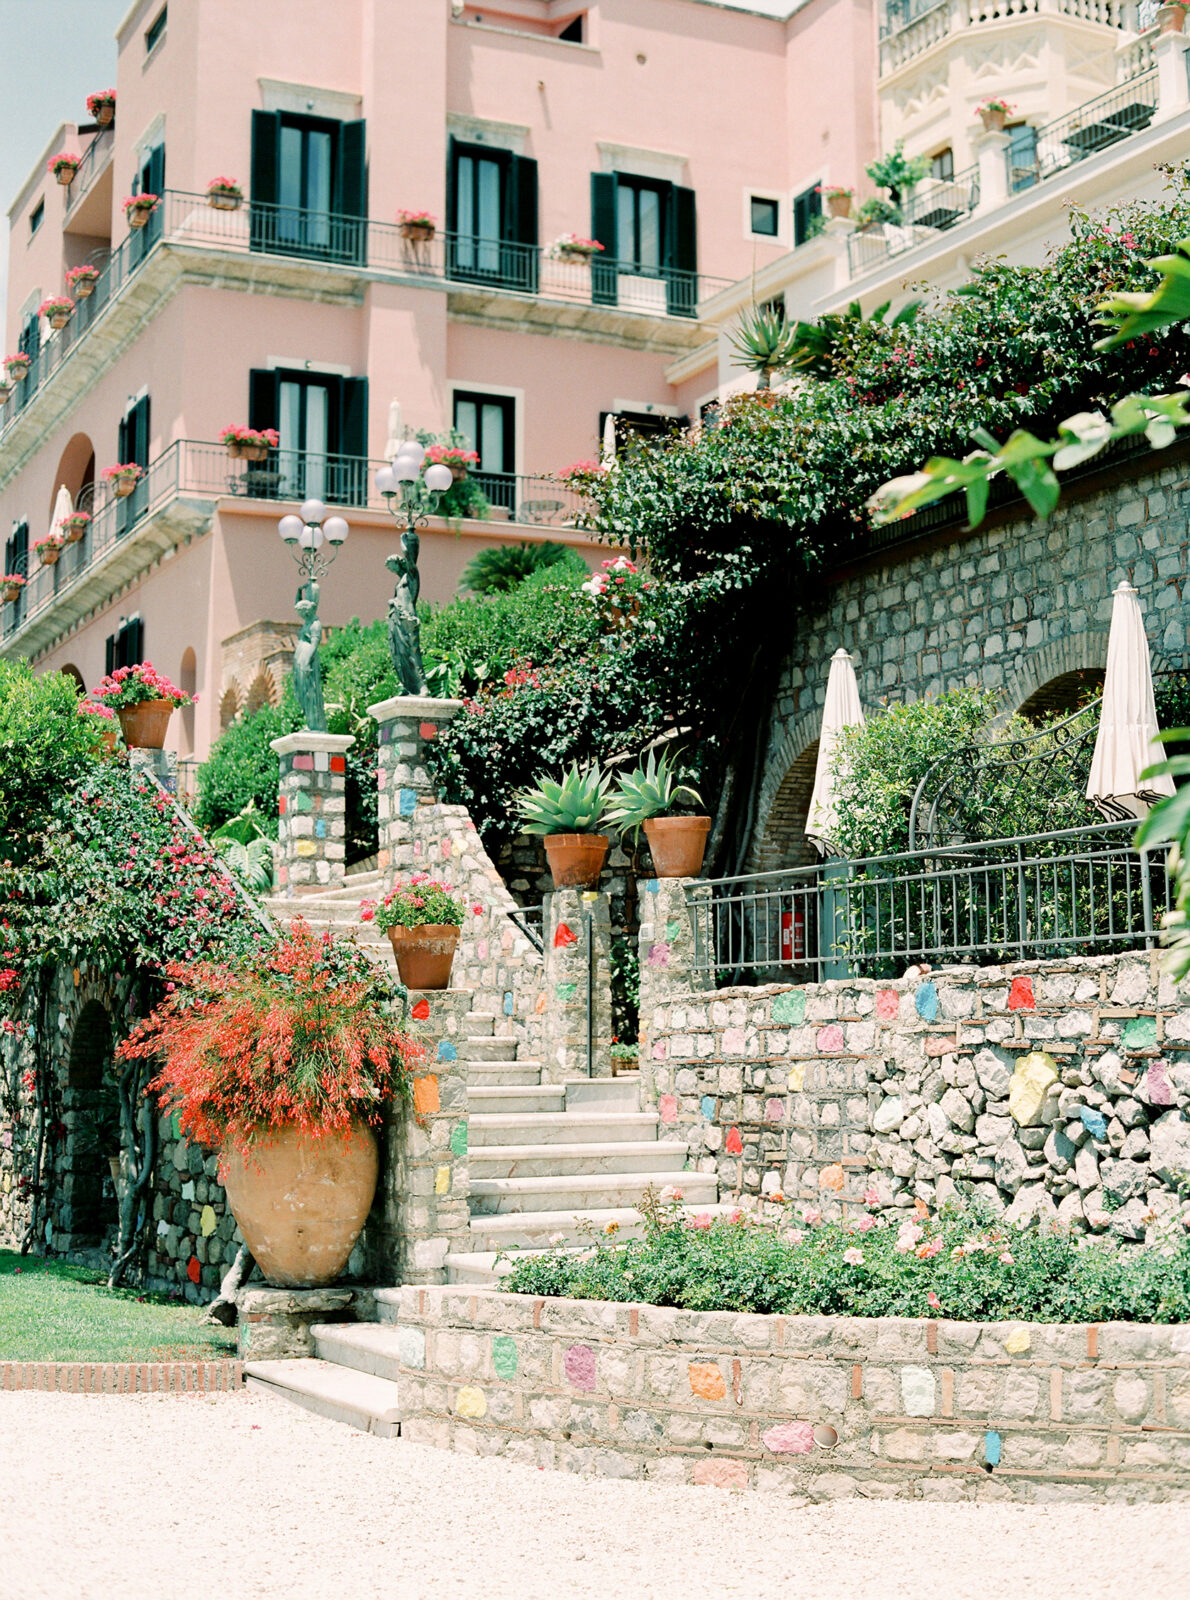 (direct upload) A colorful Mediterranean-style building adorned with a lush garden and stone steps.